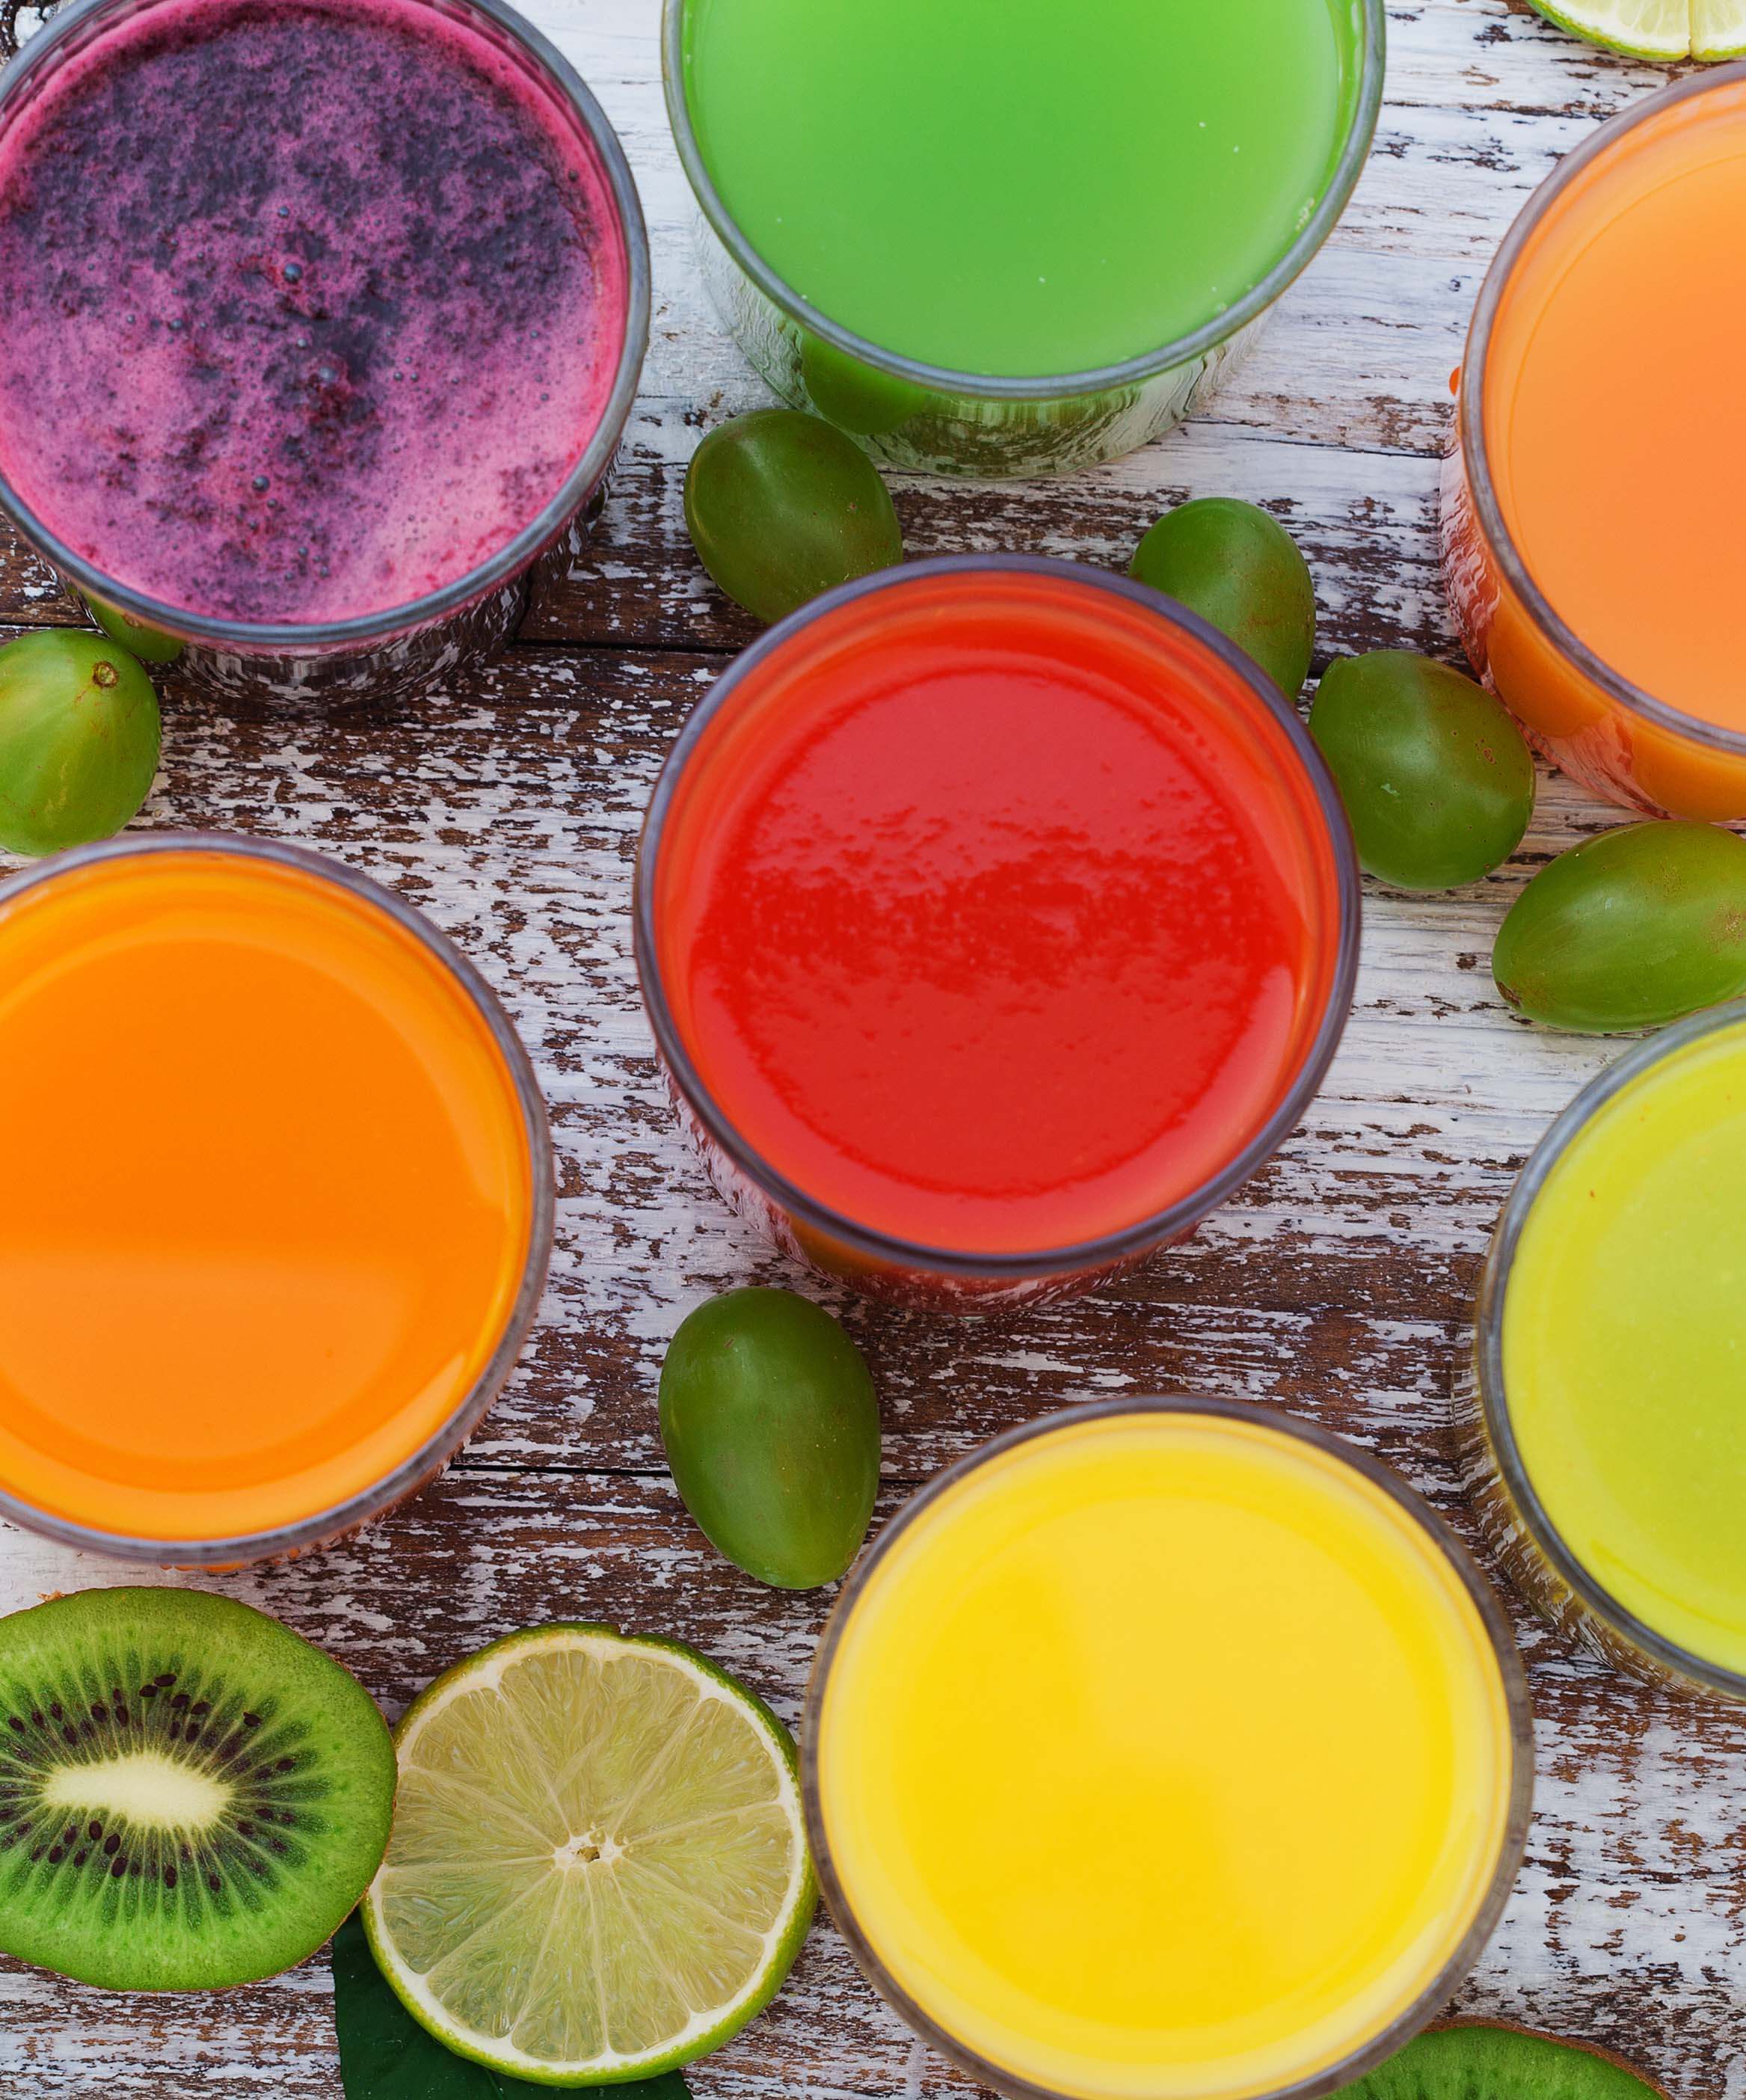 Pulp Fiction: How to use Juicing Pulp